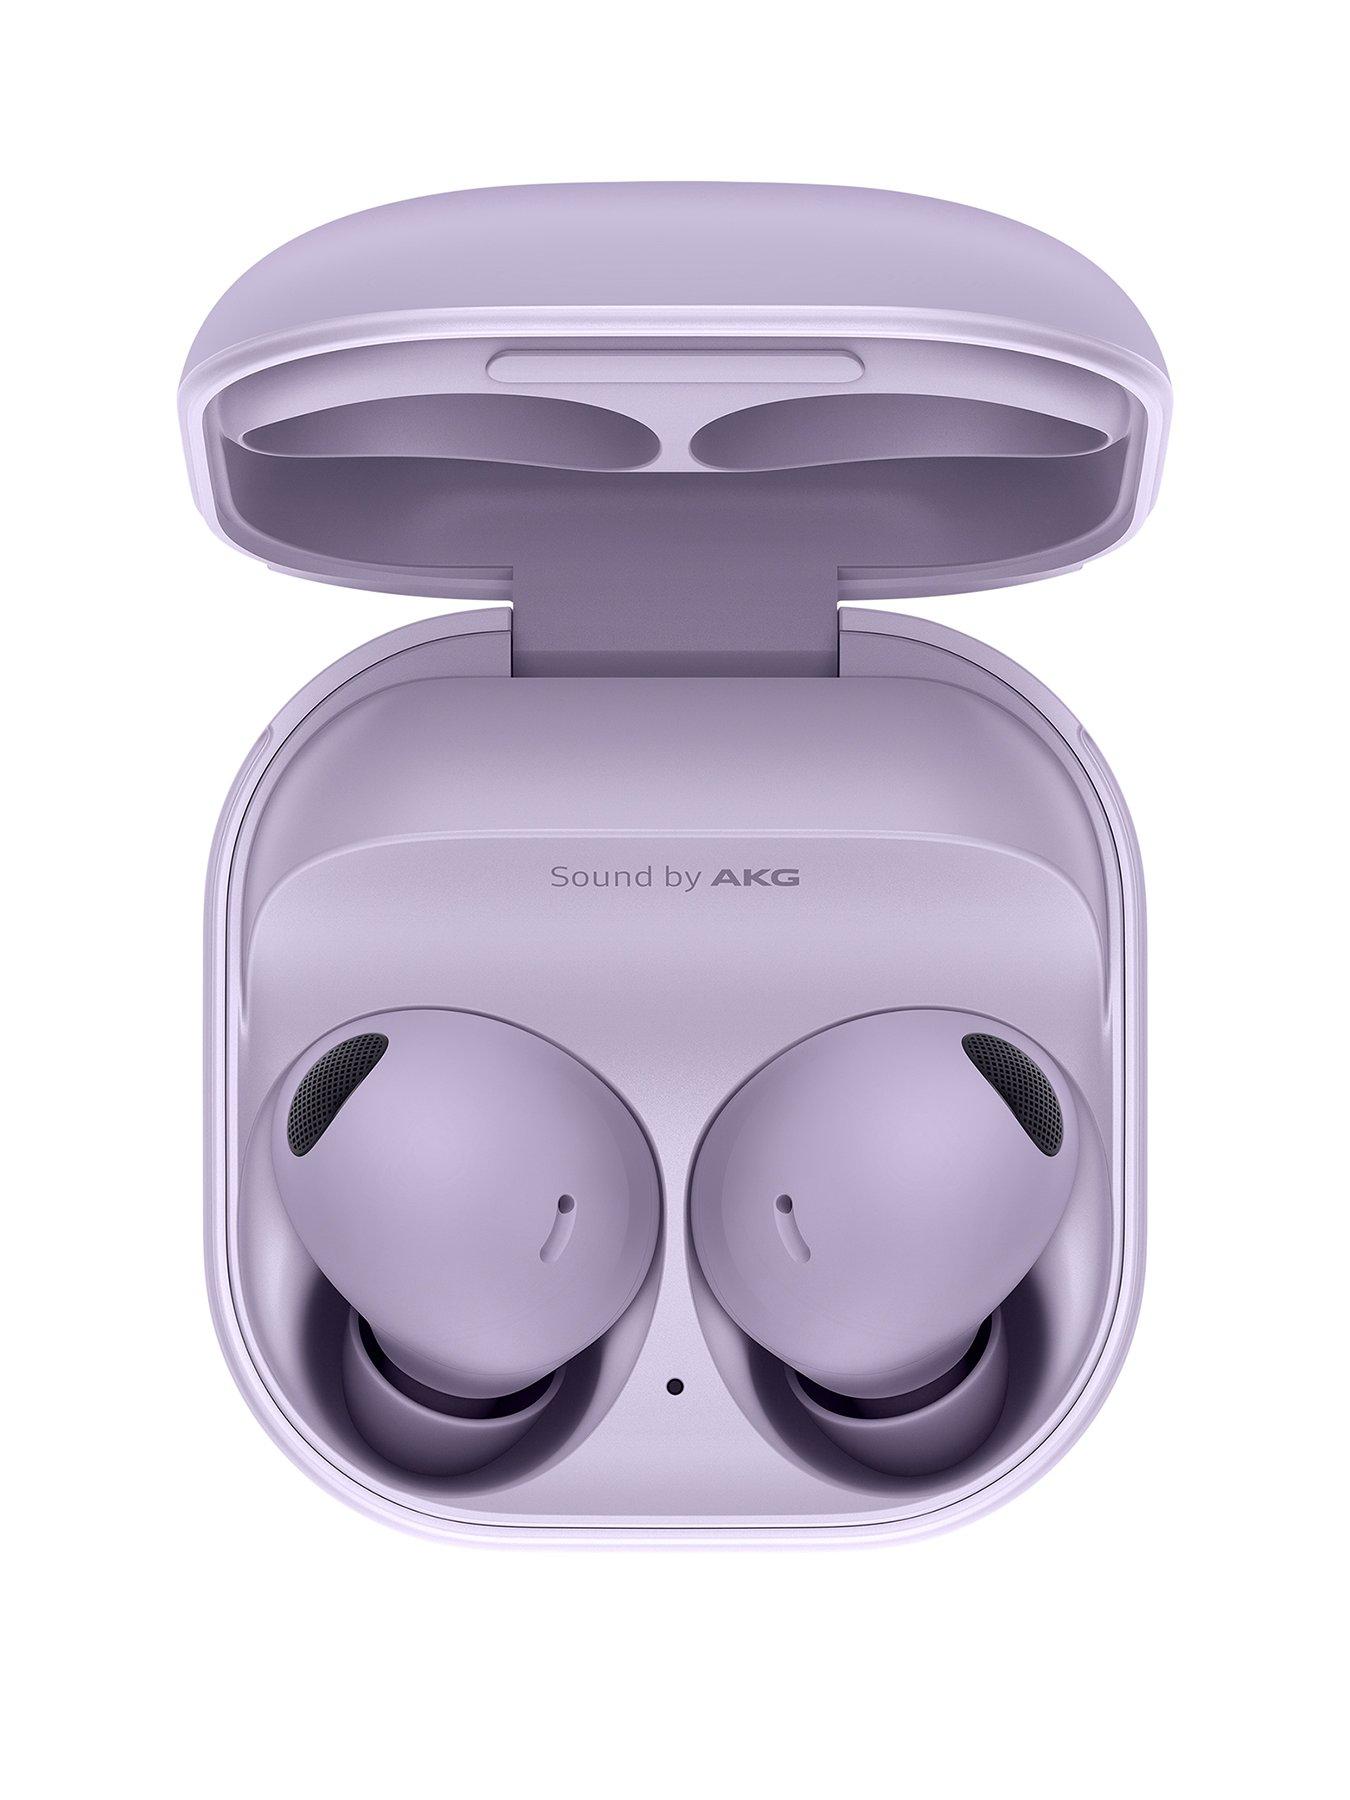  SAMSUNG Galaxy Buds FE True Wireless Bluetooth Earbuds, Comfort  and Secure in Ear Fit, Wing-Tip Design, Auto Switch Audio, Touch Control,  Built-in Voice Assistant, US Version, White : Electronics